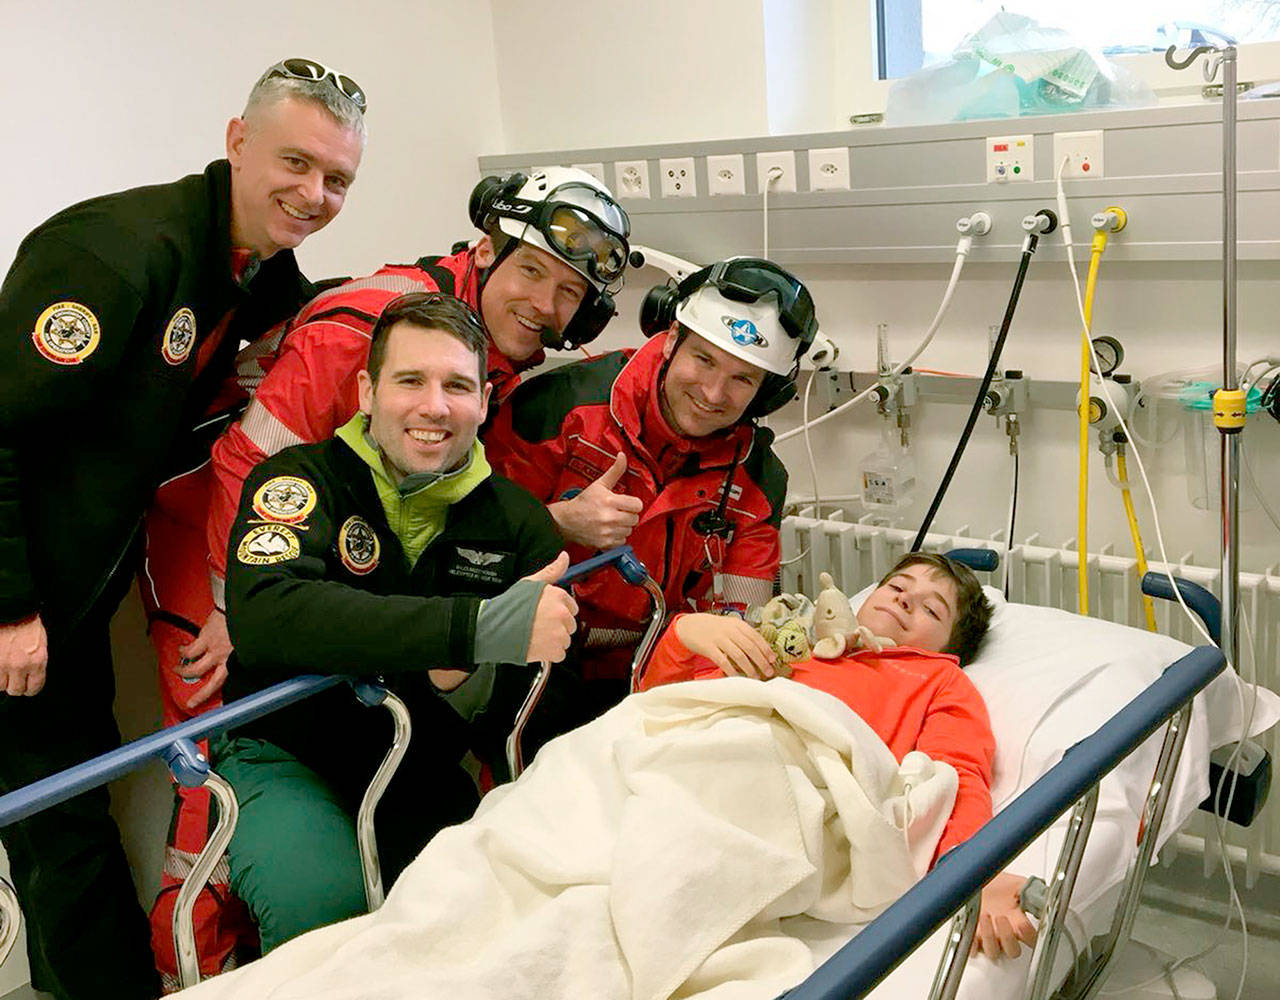 Richard Duncan (left) and Miles Mcdonough (second from left) of the Snohomish County Sheriff’s Office helicopter rescue team pose with Swiss helicopter crew members Peter Lackermeier (third from left) and Oliver Kreuzer with the boy they helped rescue after a skiing accident on Rothorn mountain in Switzerland.